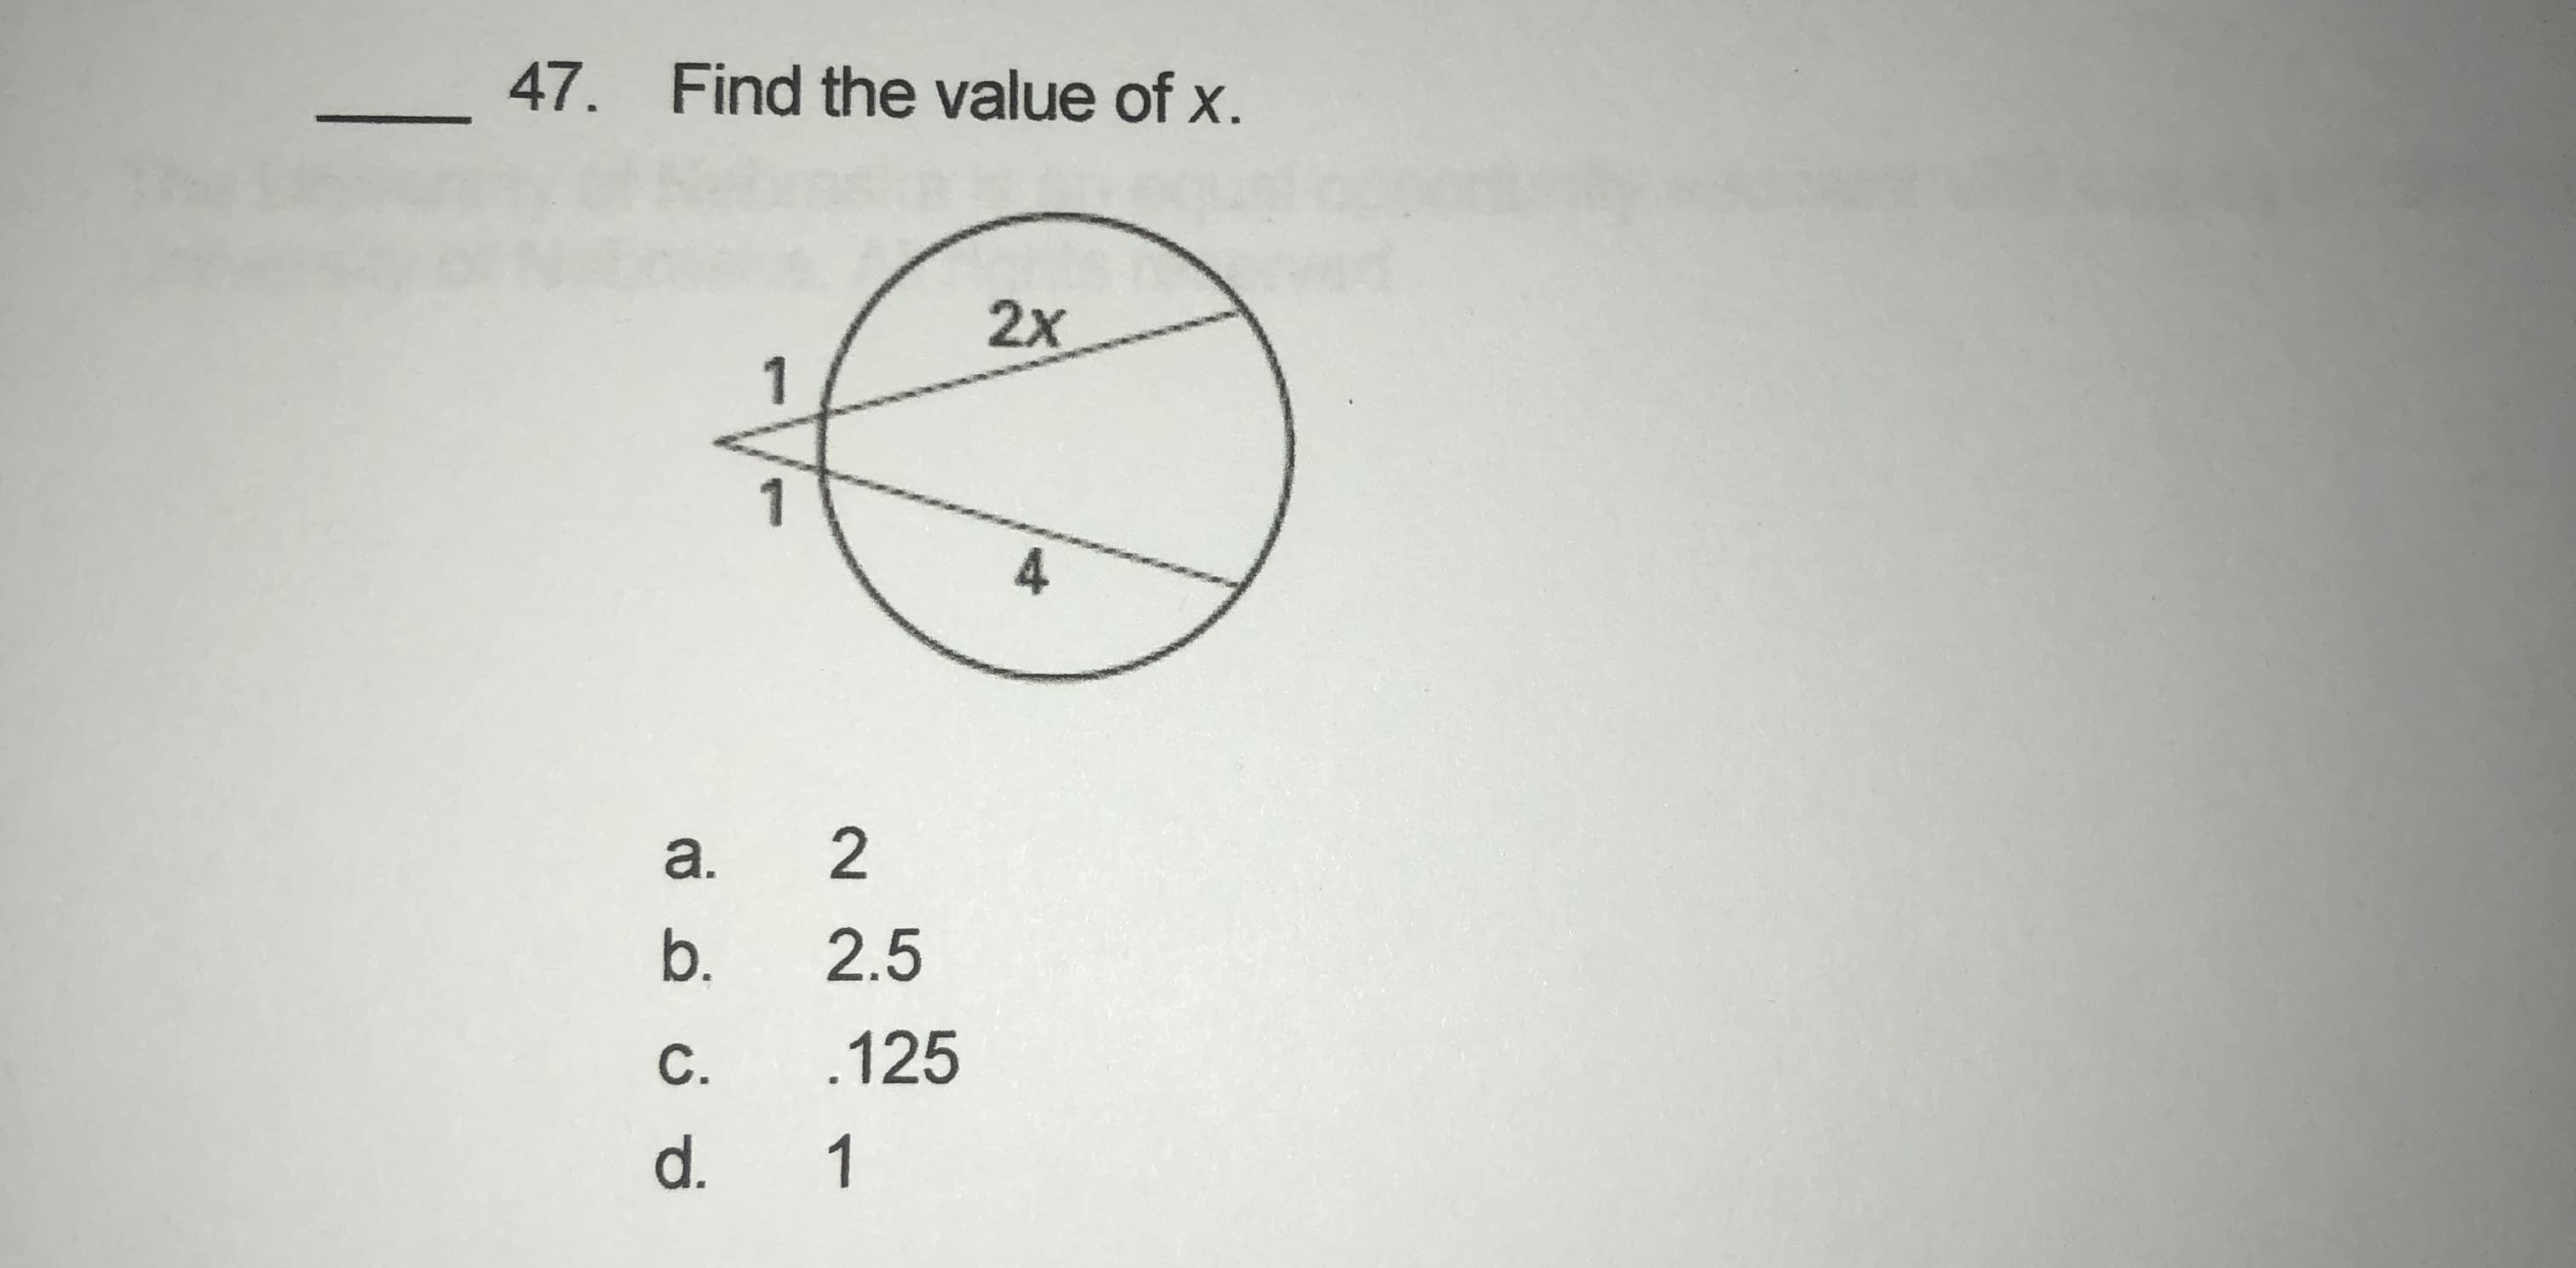 47. Find the value of x.
2x
1
4
